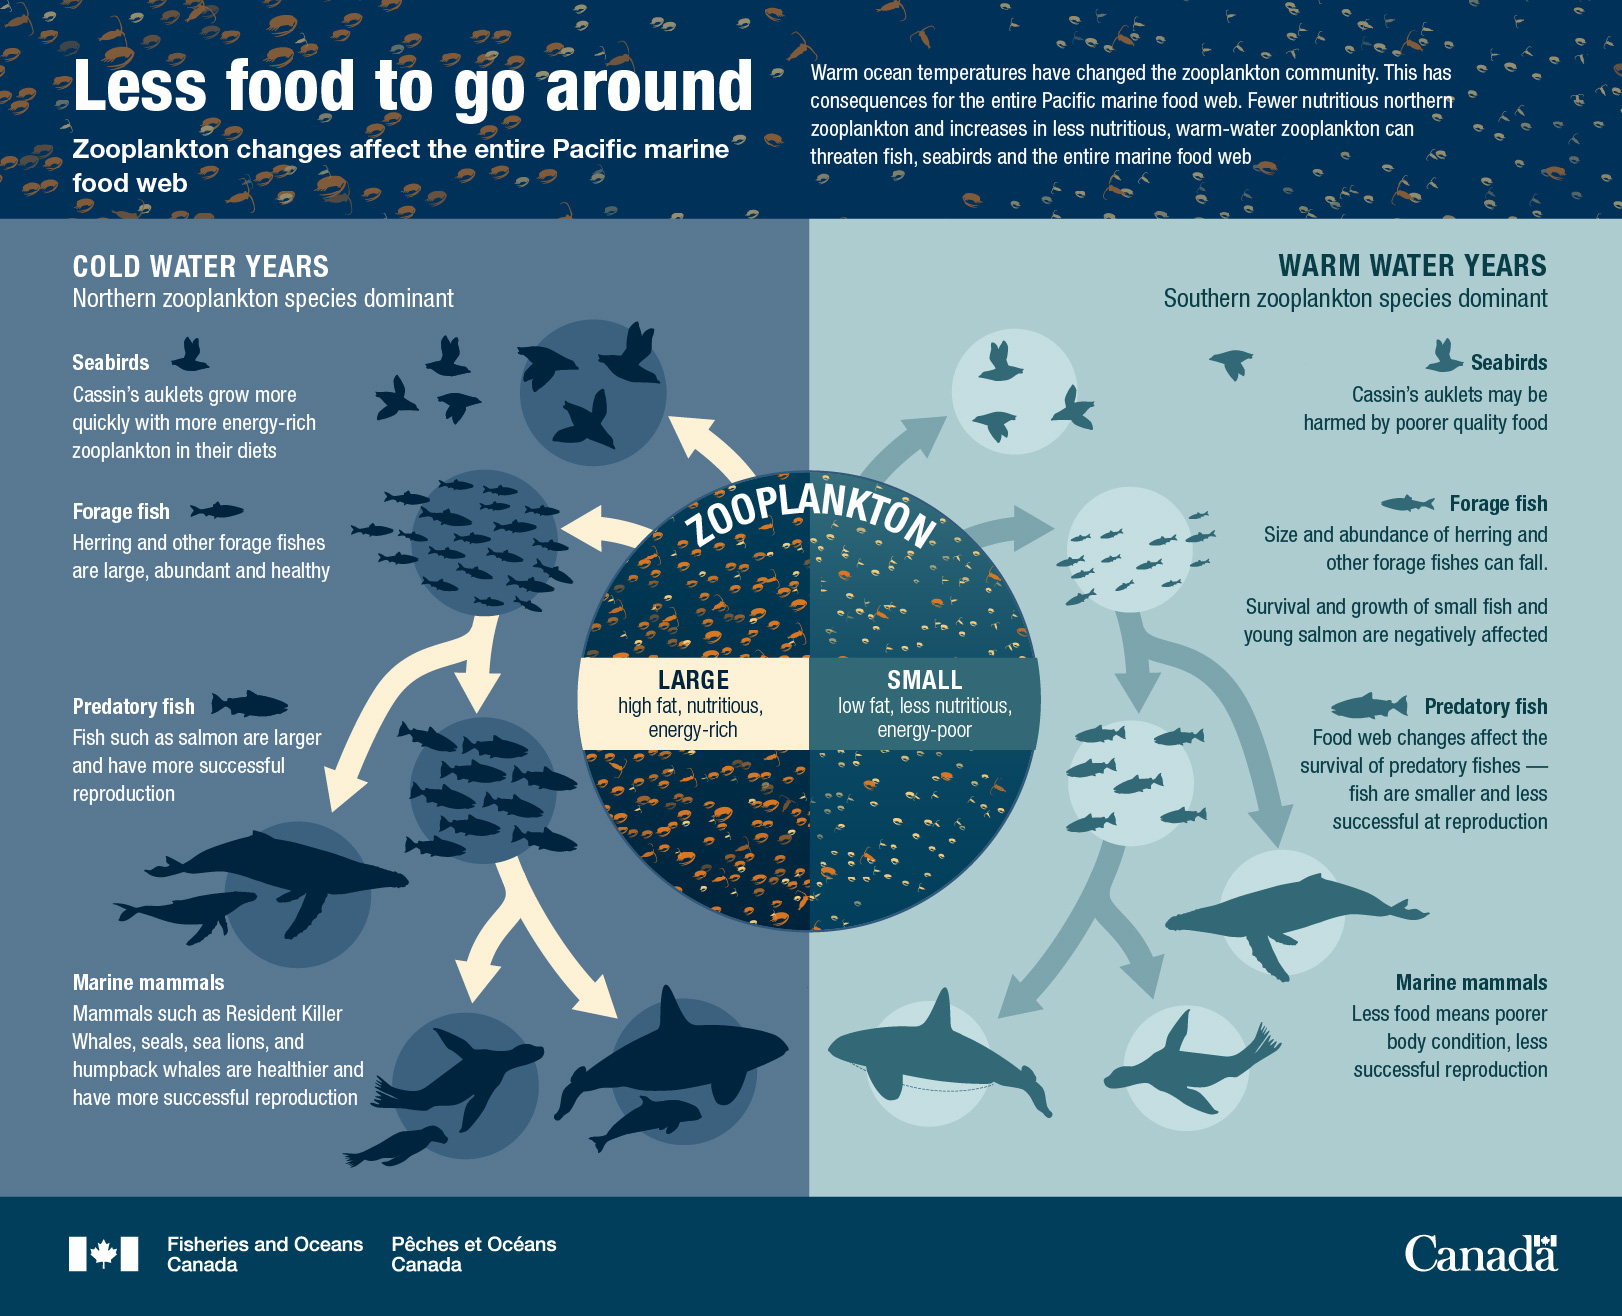 Canada’s Oceans Now, Pacific Ecosystems 2021 - Less food to go around